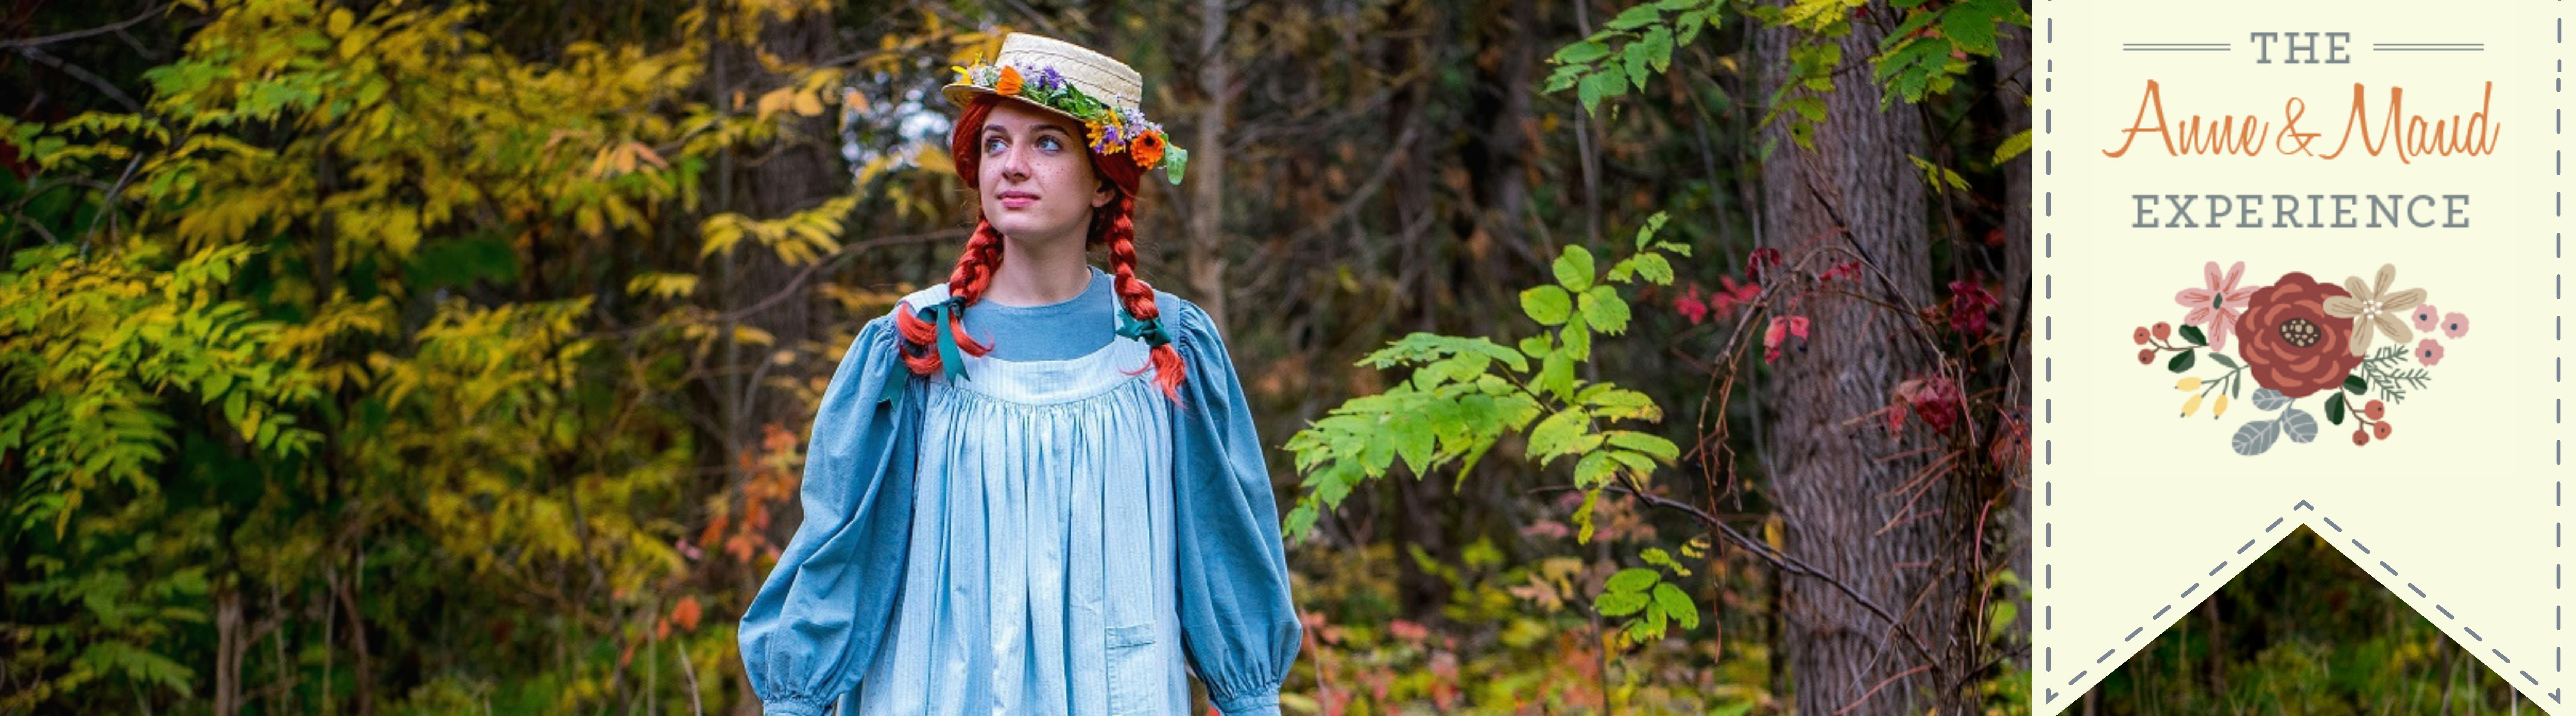 woman dressed as Anne Shirley, walking through a green forest scene